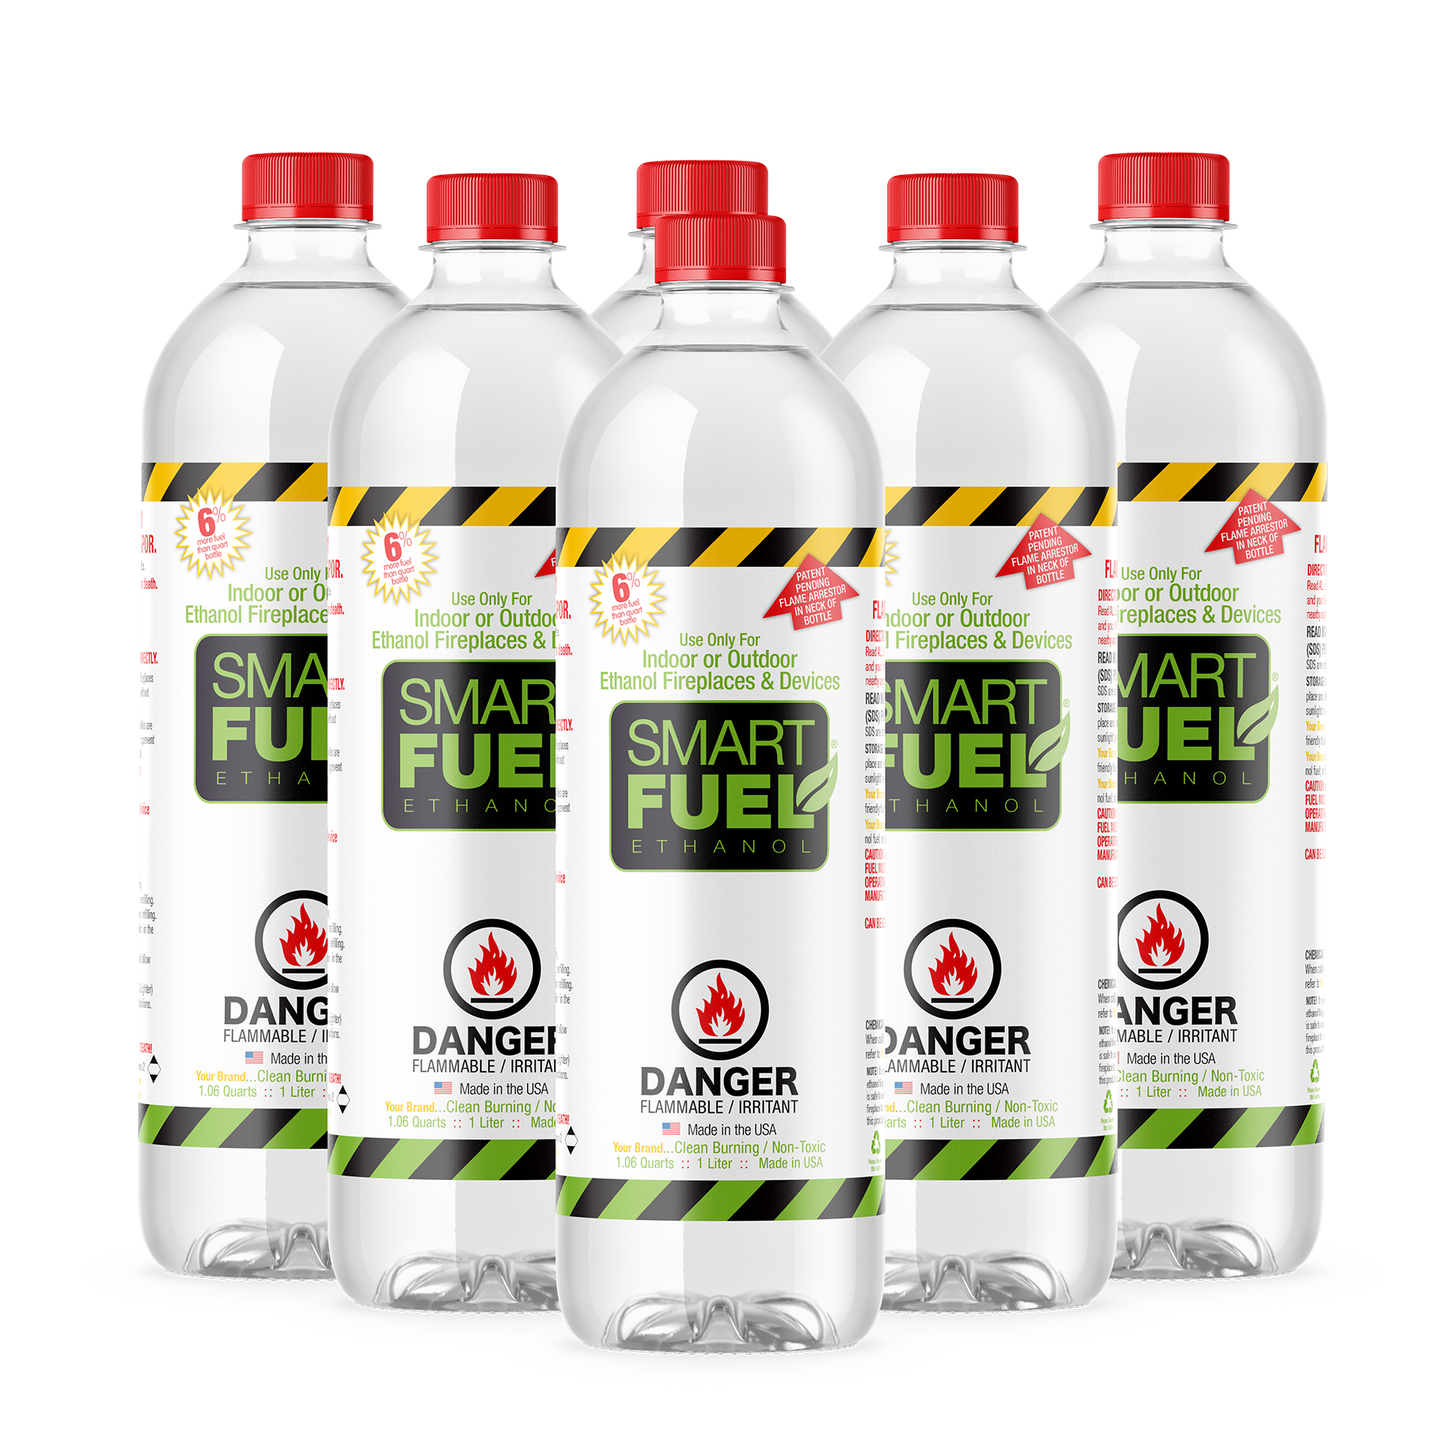 SPIN Bioethanol 1l Bottle, Six-Pack - direct from the brand